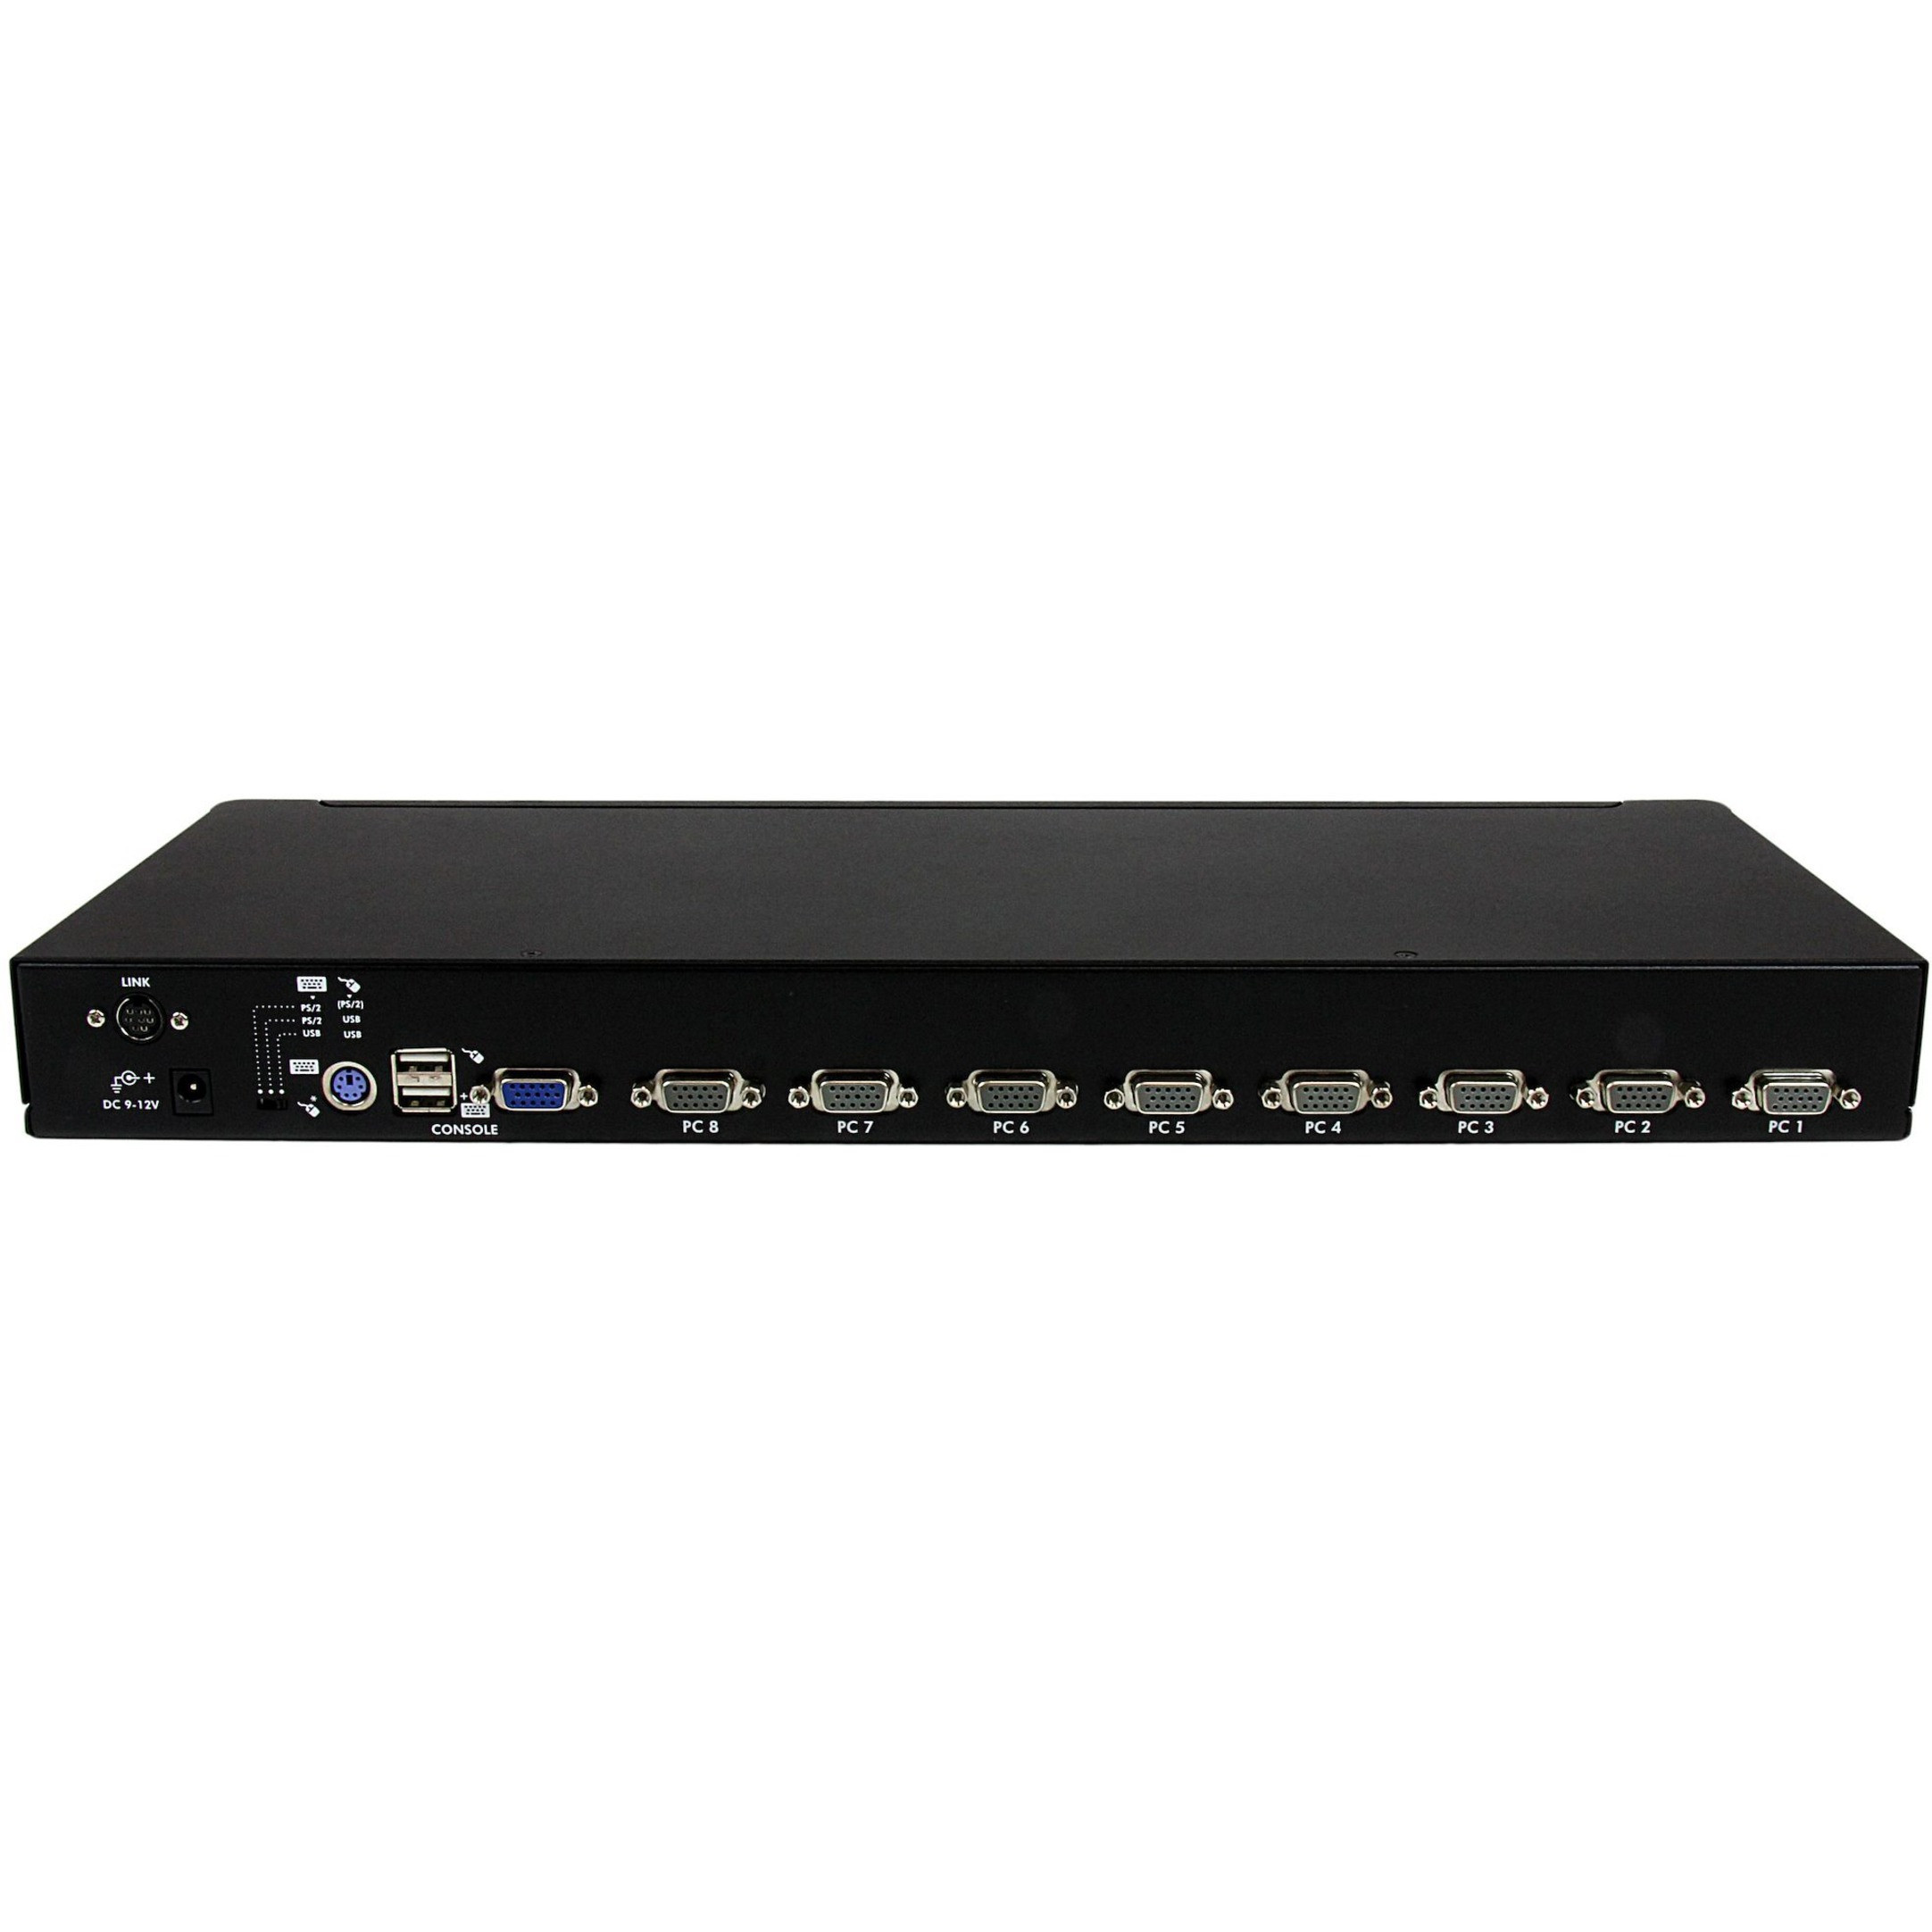 Startech .com 8 Port 1U Rackmount USB PS/2 KVM Switch with OSDControl up to 8 USB or PS/2-connected computers from one keyboard, mouse and m… SV831DUSB